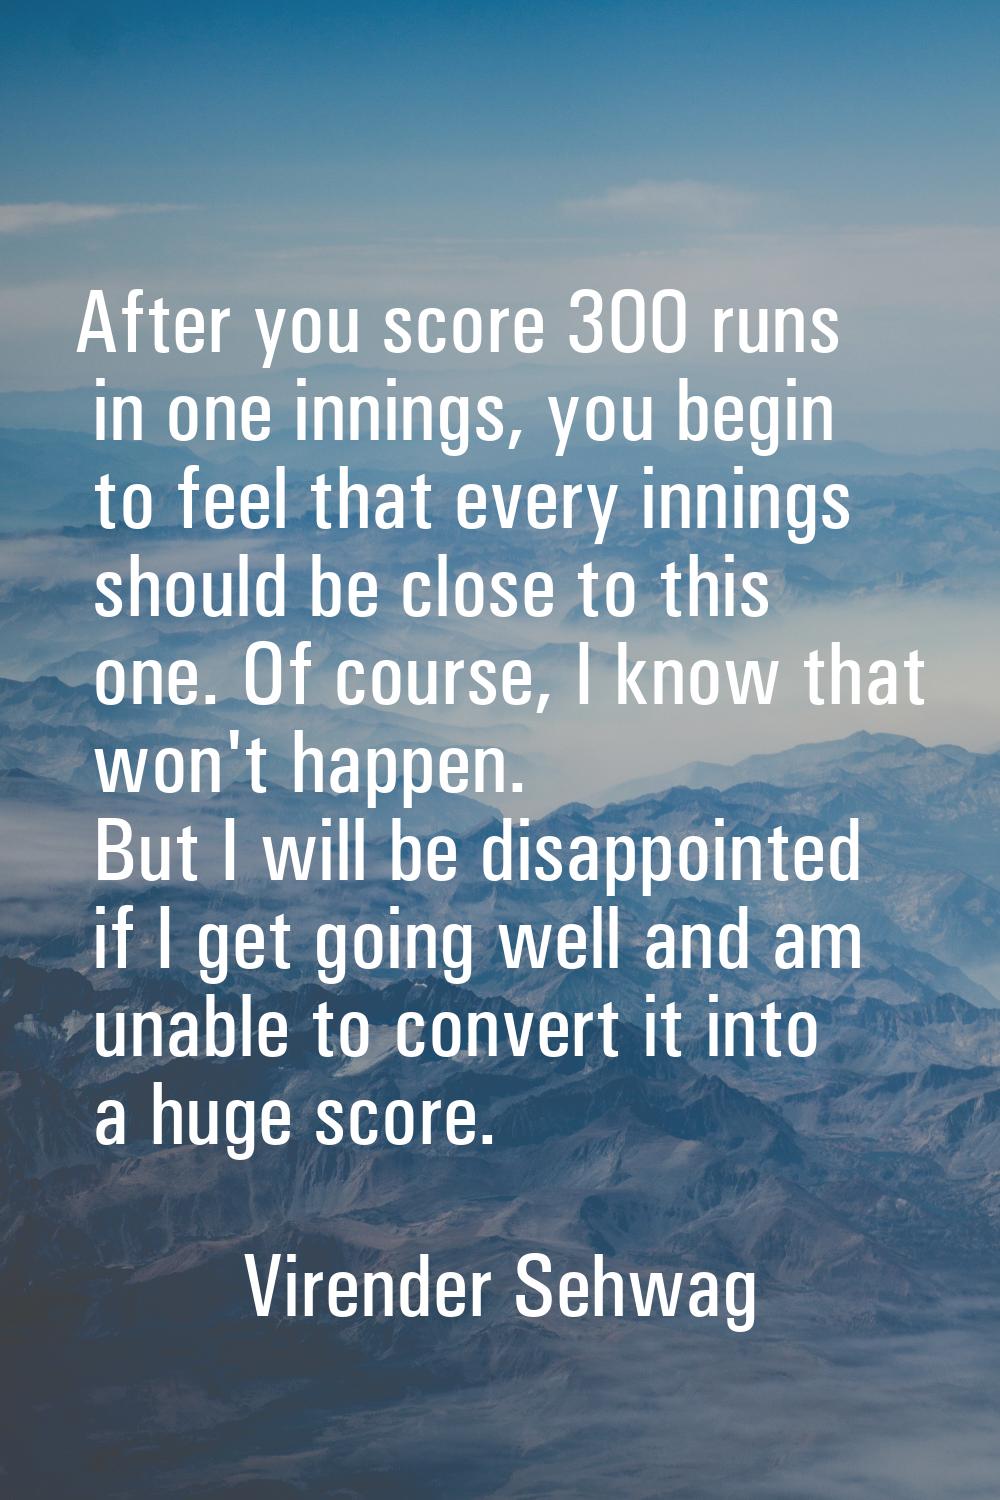 After you score 300 runs in one innings, you begin to feel that every innings should be close to th